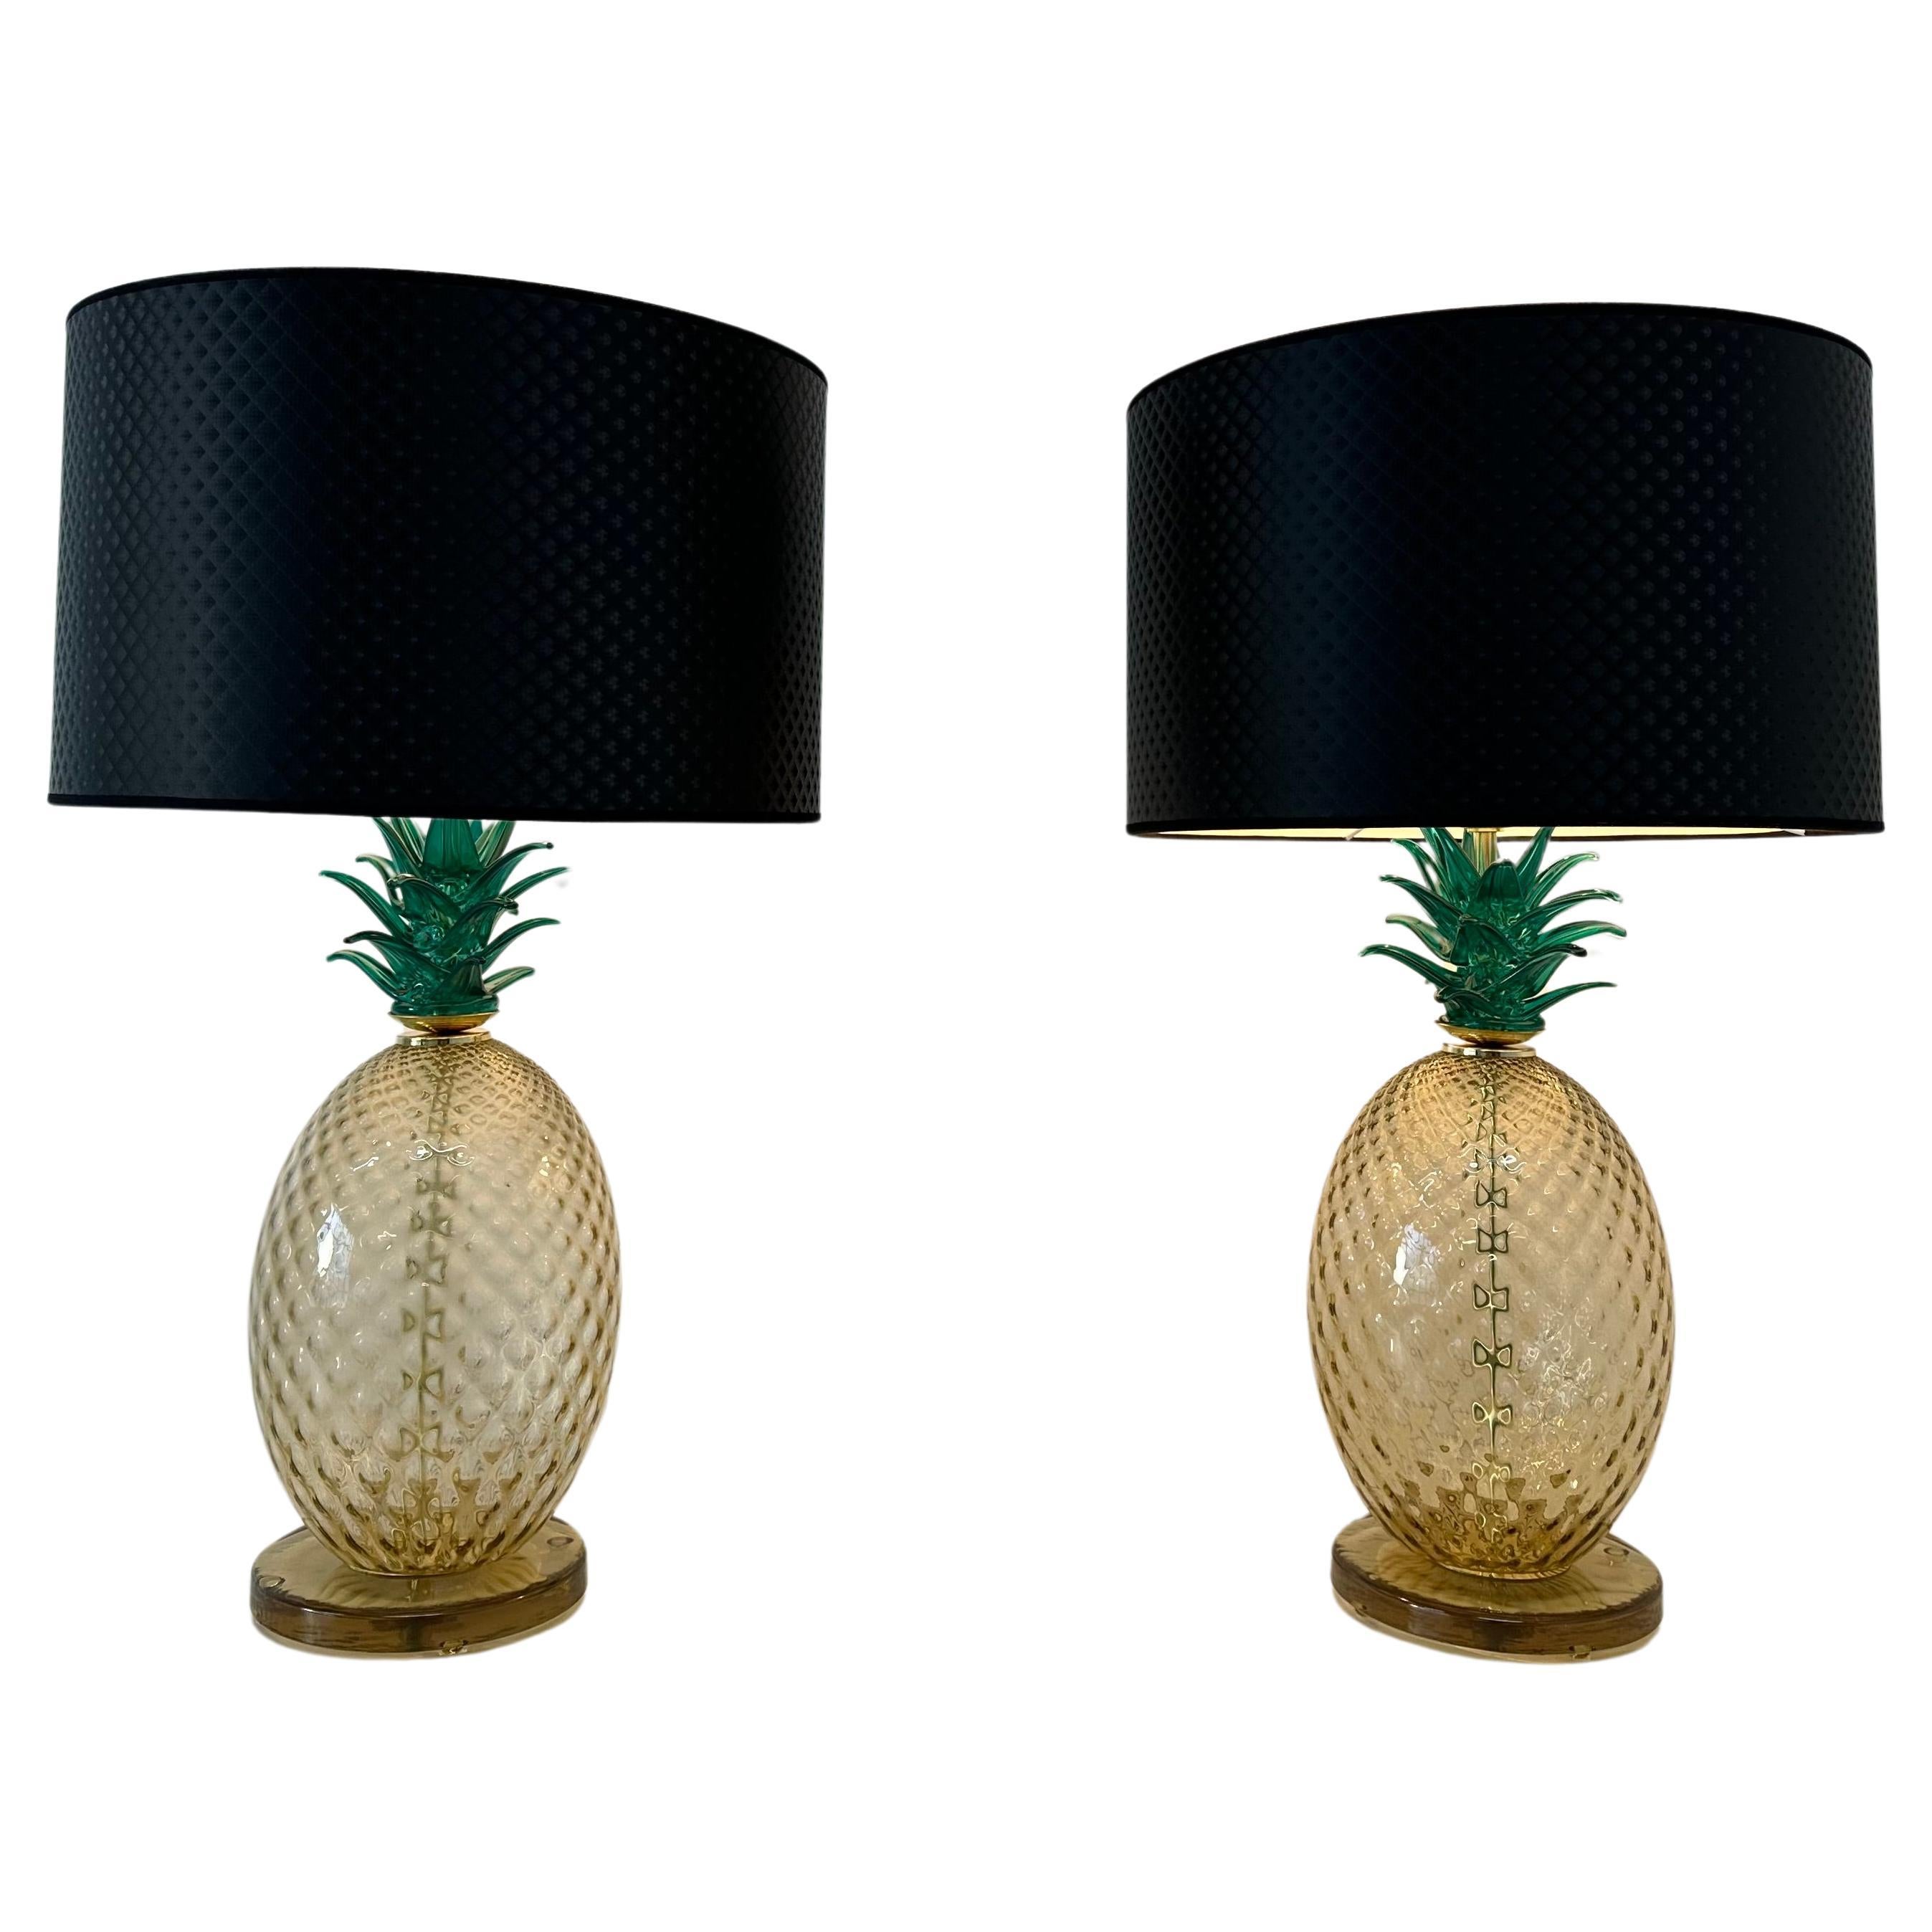 Pair of Italian Art Deco Pineapple Murano Glass Lamps with Lampshades 